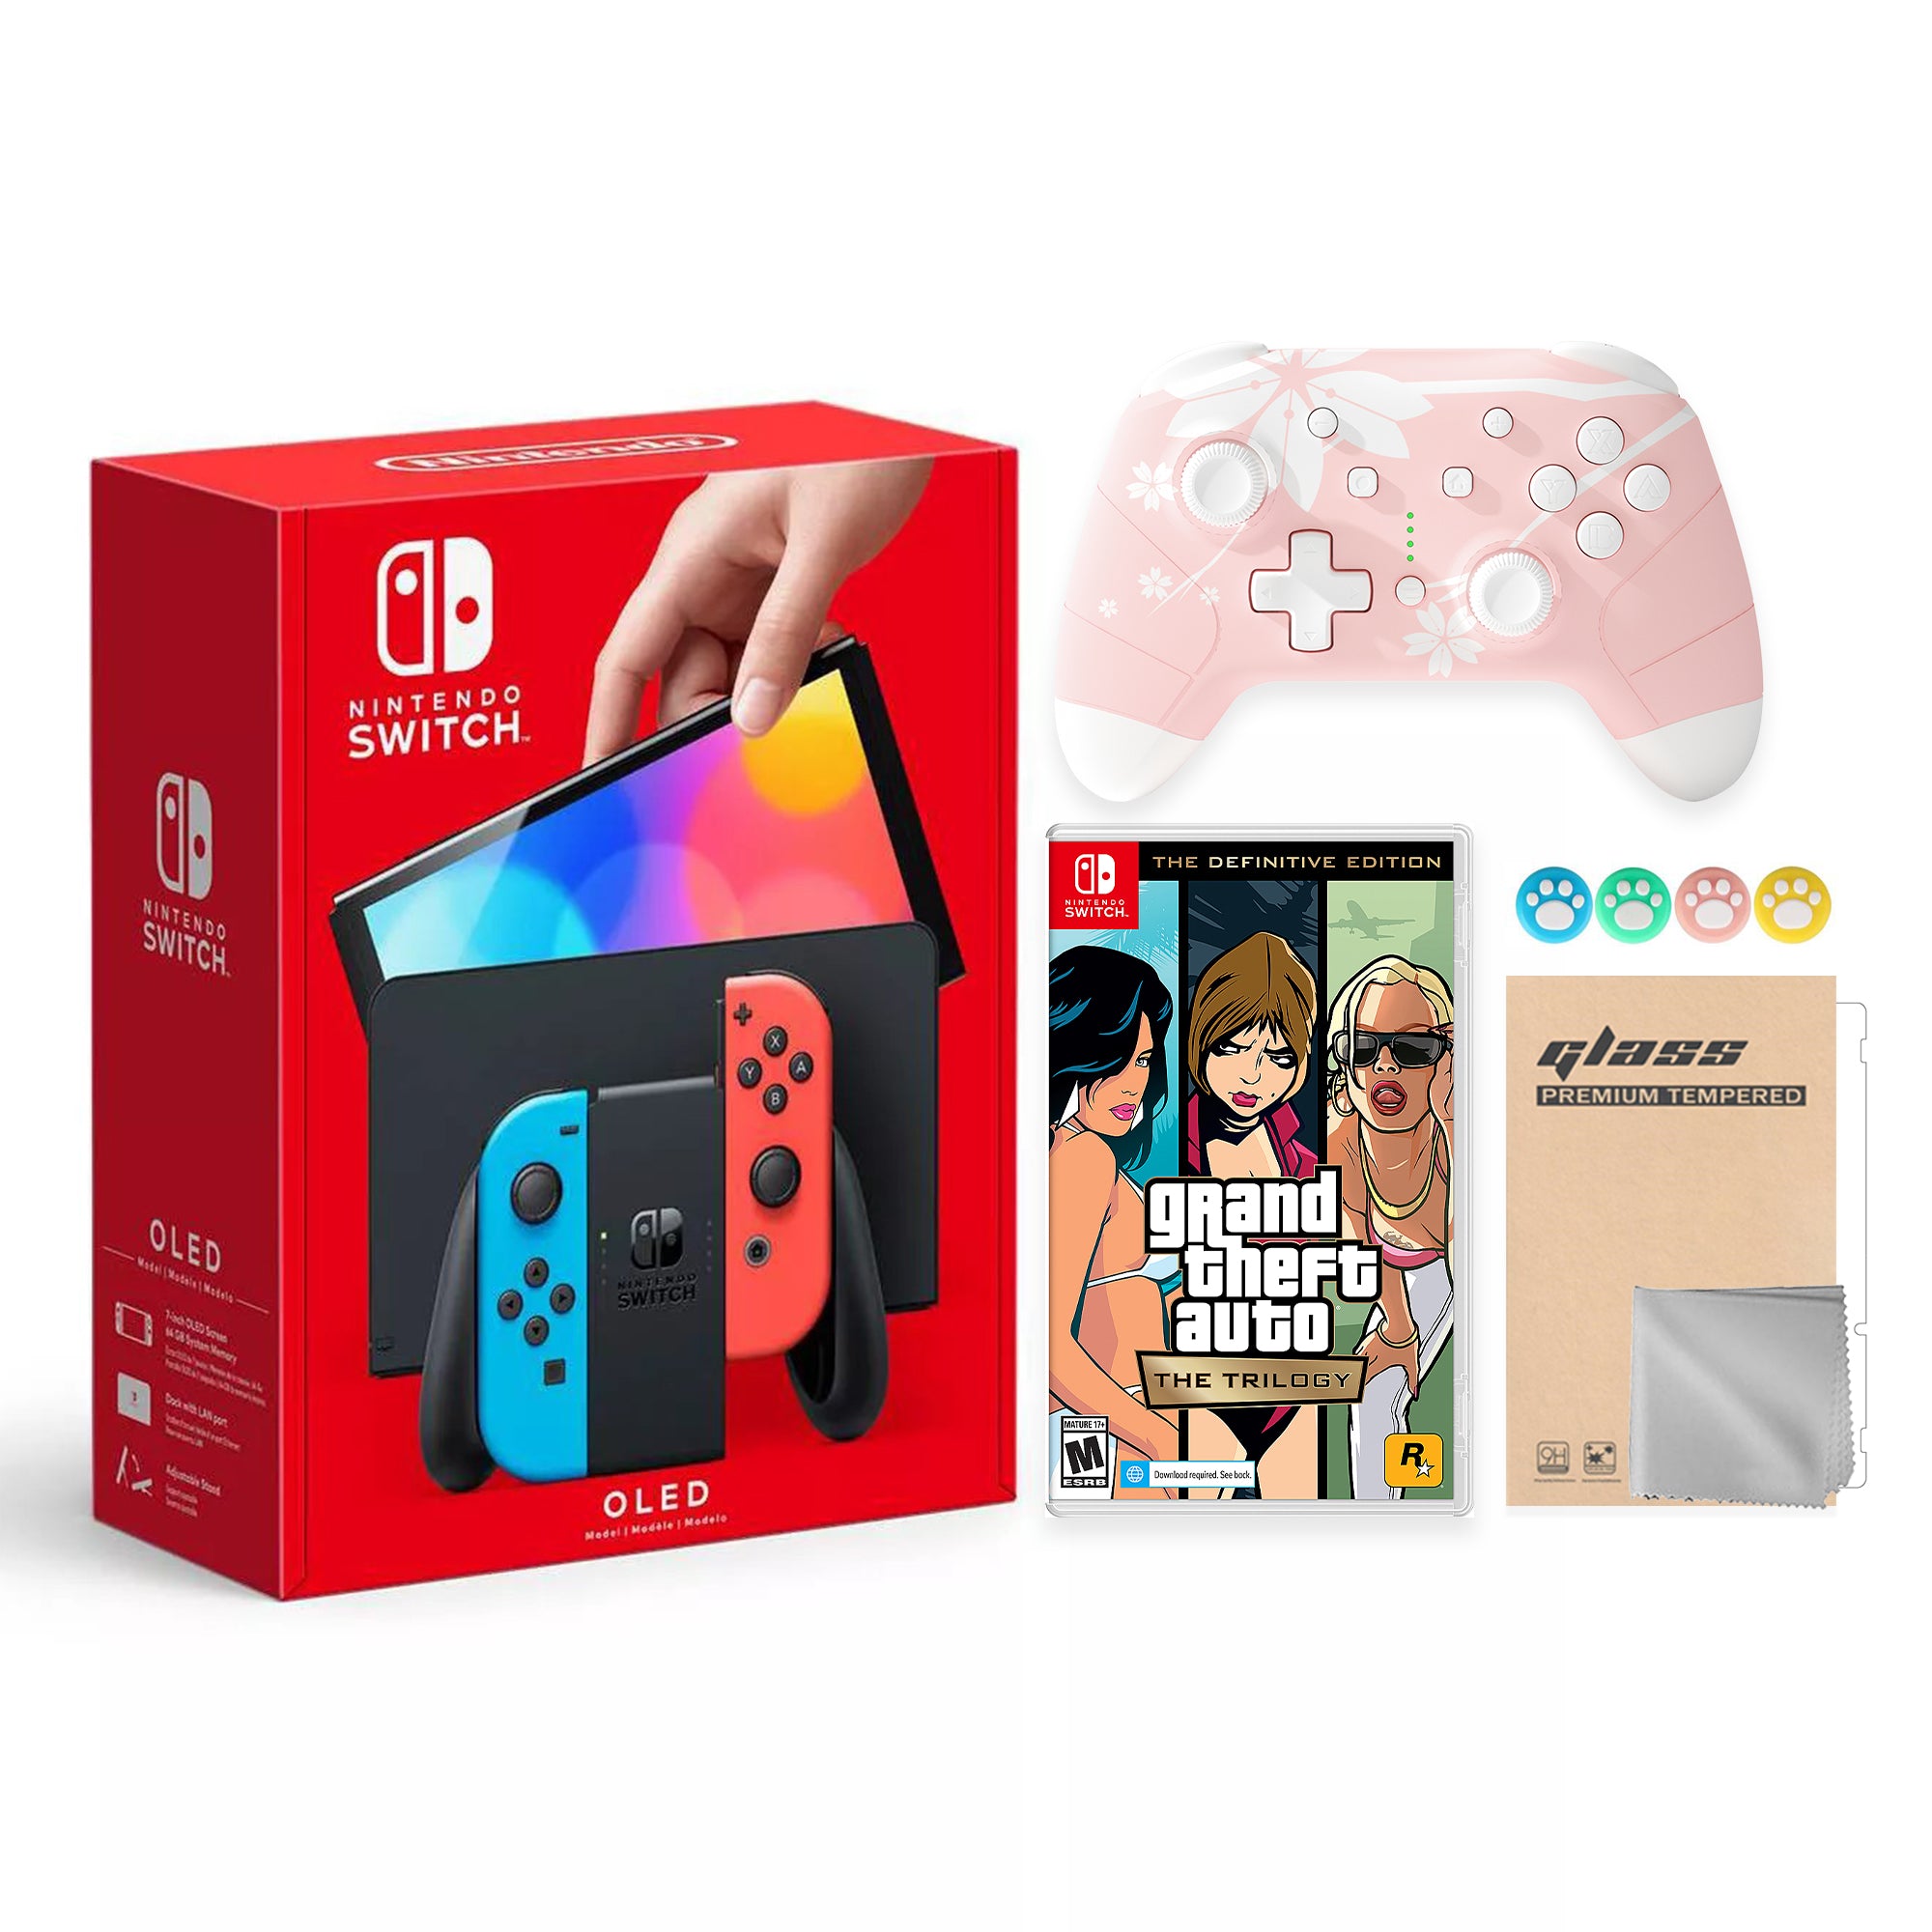 2022 New Nintendo Switch OLED Model Neon Red Blue Joy Con 64GB Console Improved HD Screen & LAN-Port Dock with Grand Theft Auto: The Trilogy -  Mytrix Wireless Switch Pro Controller and Accessories